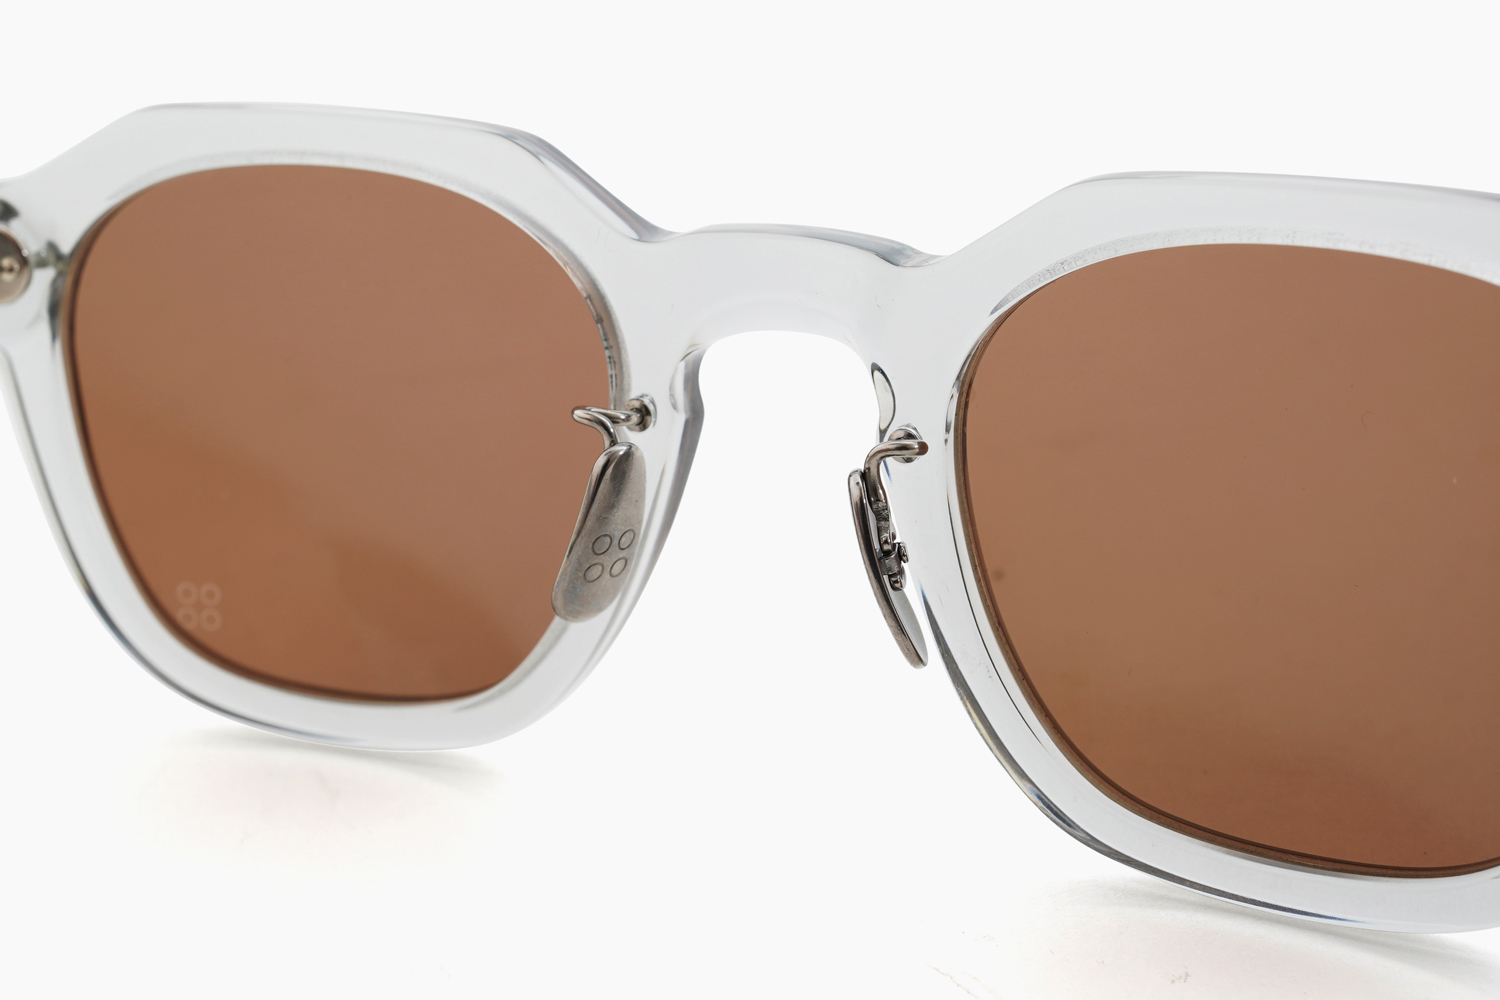 GRANT - 490｜＊SUNGLASSES COLLECTION - 2022 SPRING & SUMMER